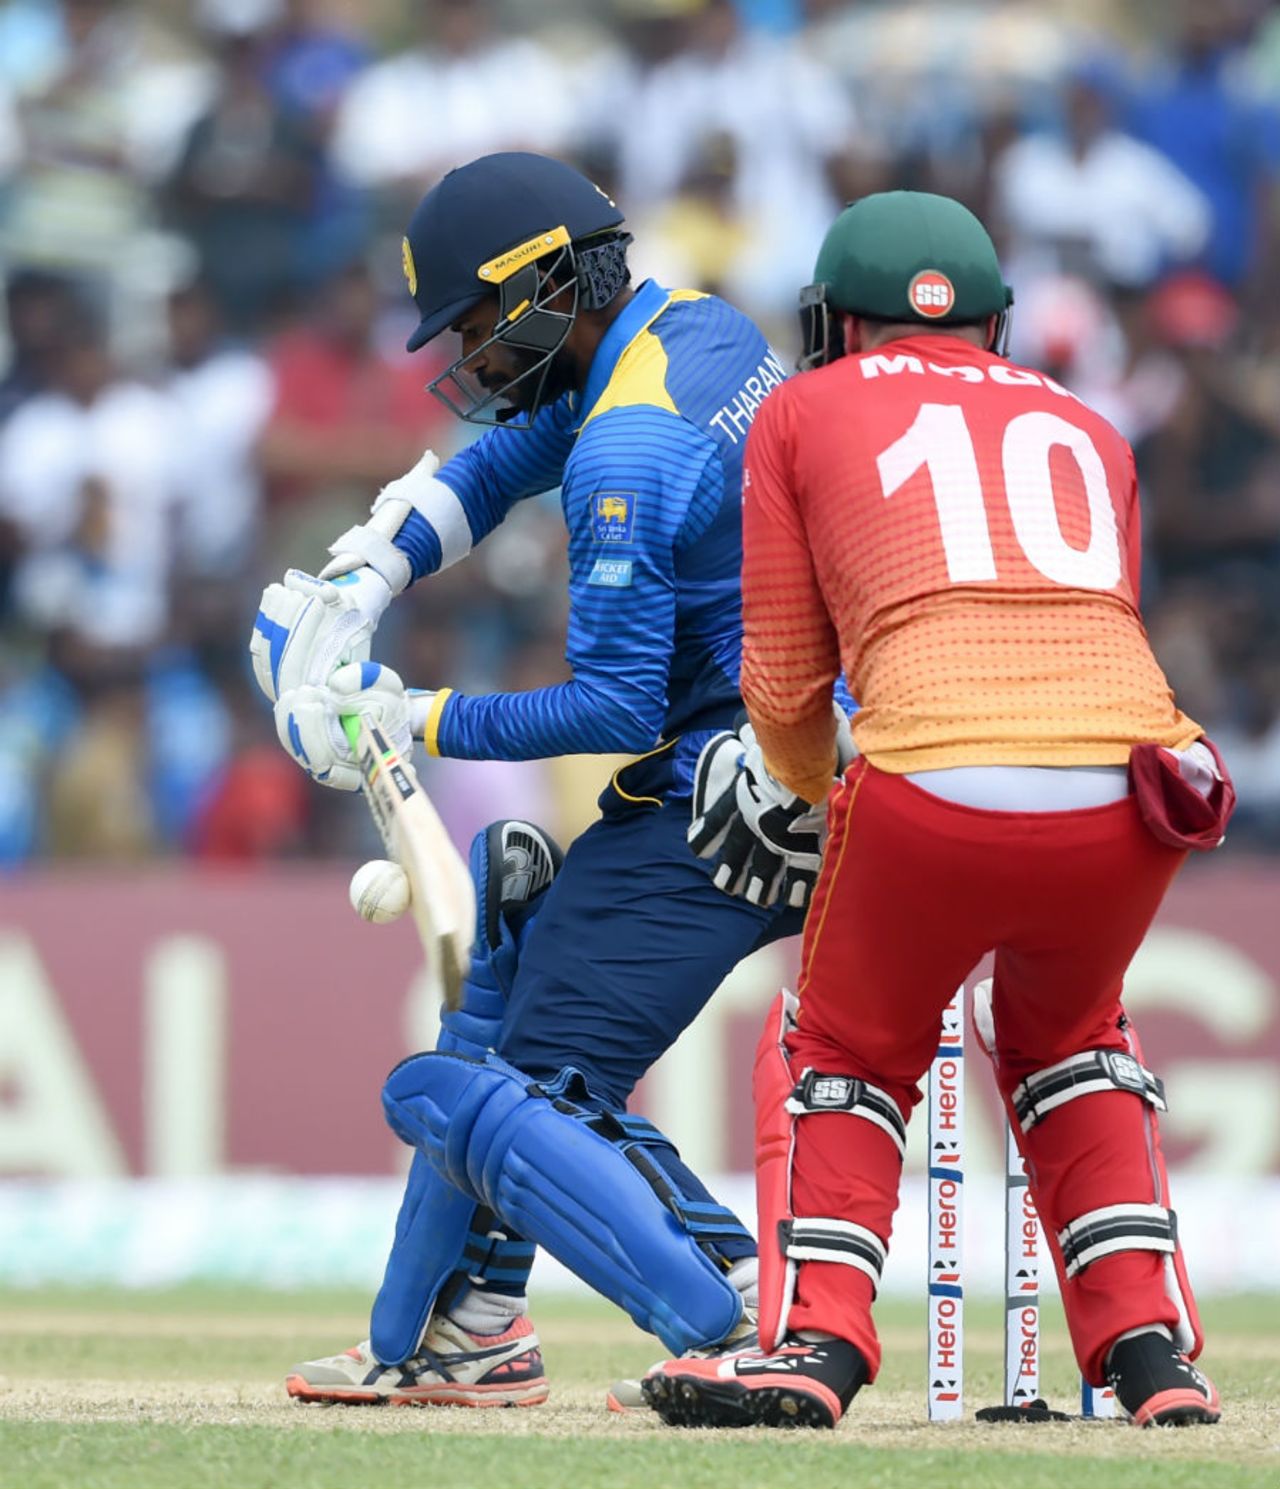 Upul Tharanga glides one through the off side during the course of his 73-ball 79, Sri Lanka v Zimbabwe, 1st ODI, Galle, June 30, 2017